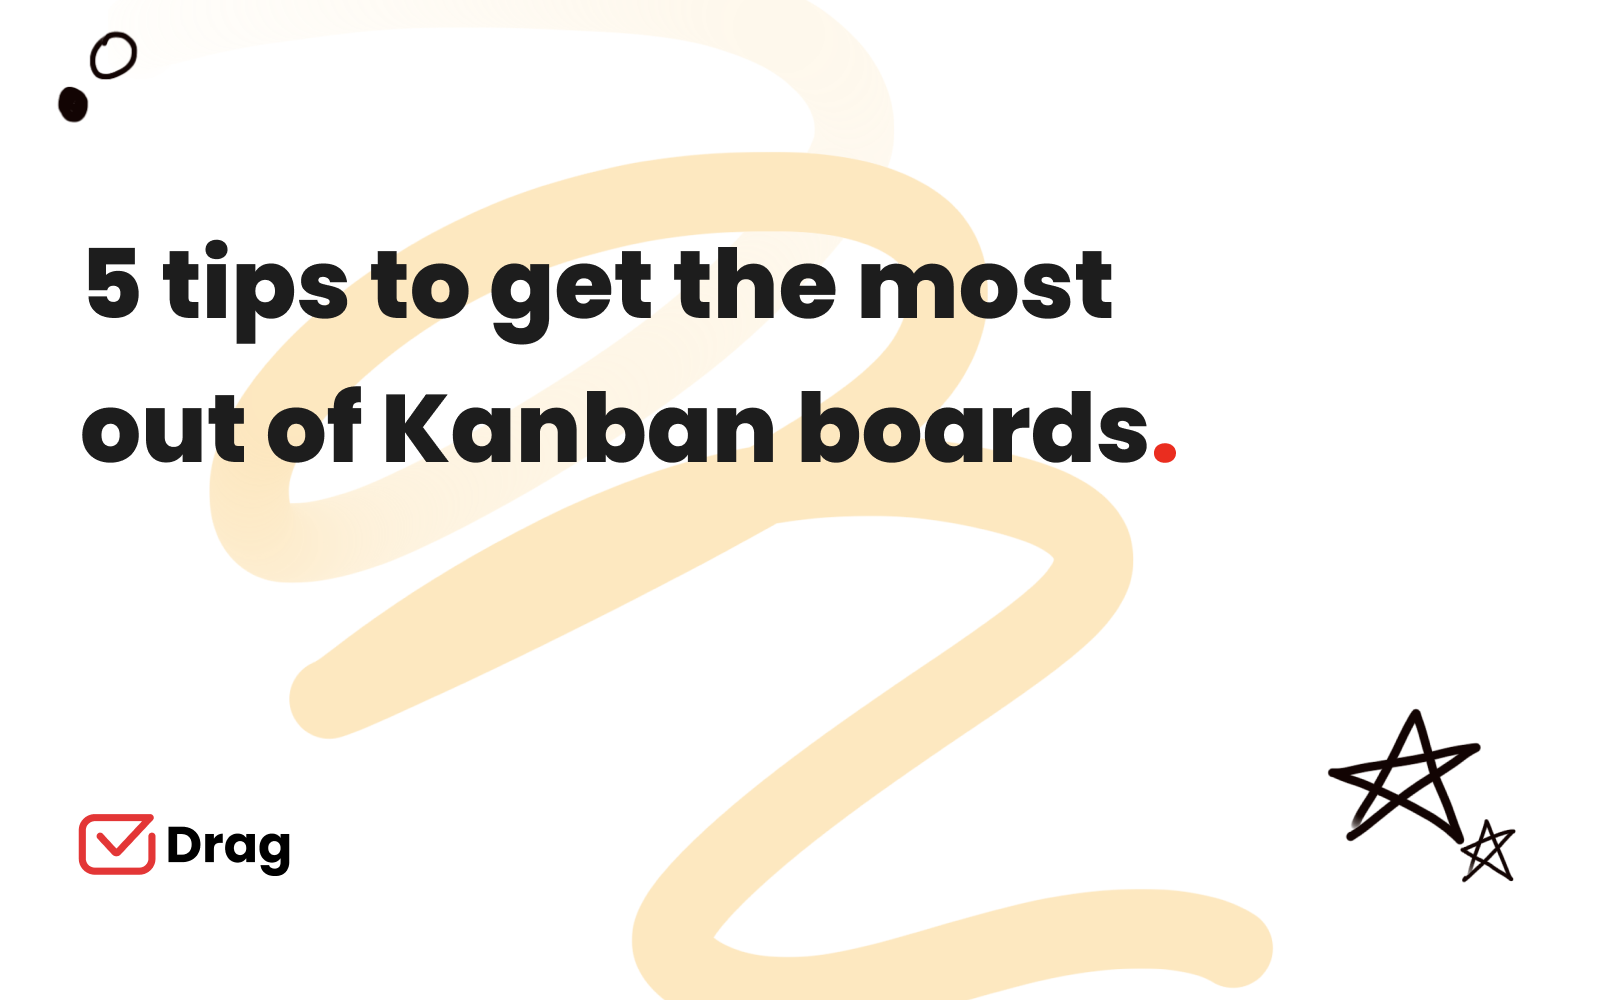 tips to get the most out of kanban boards